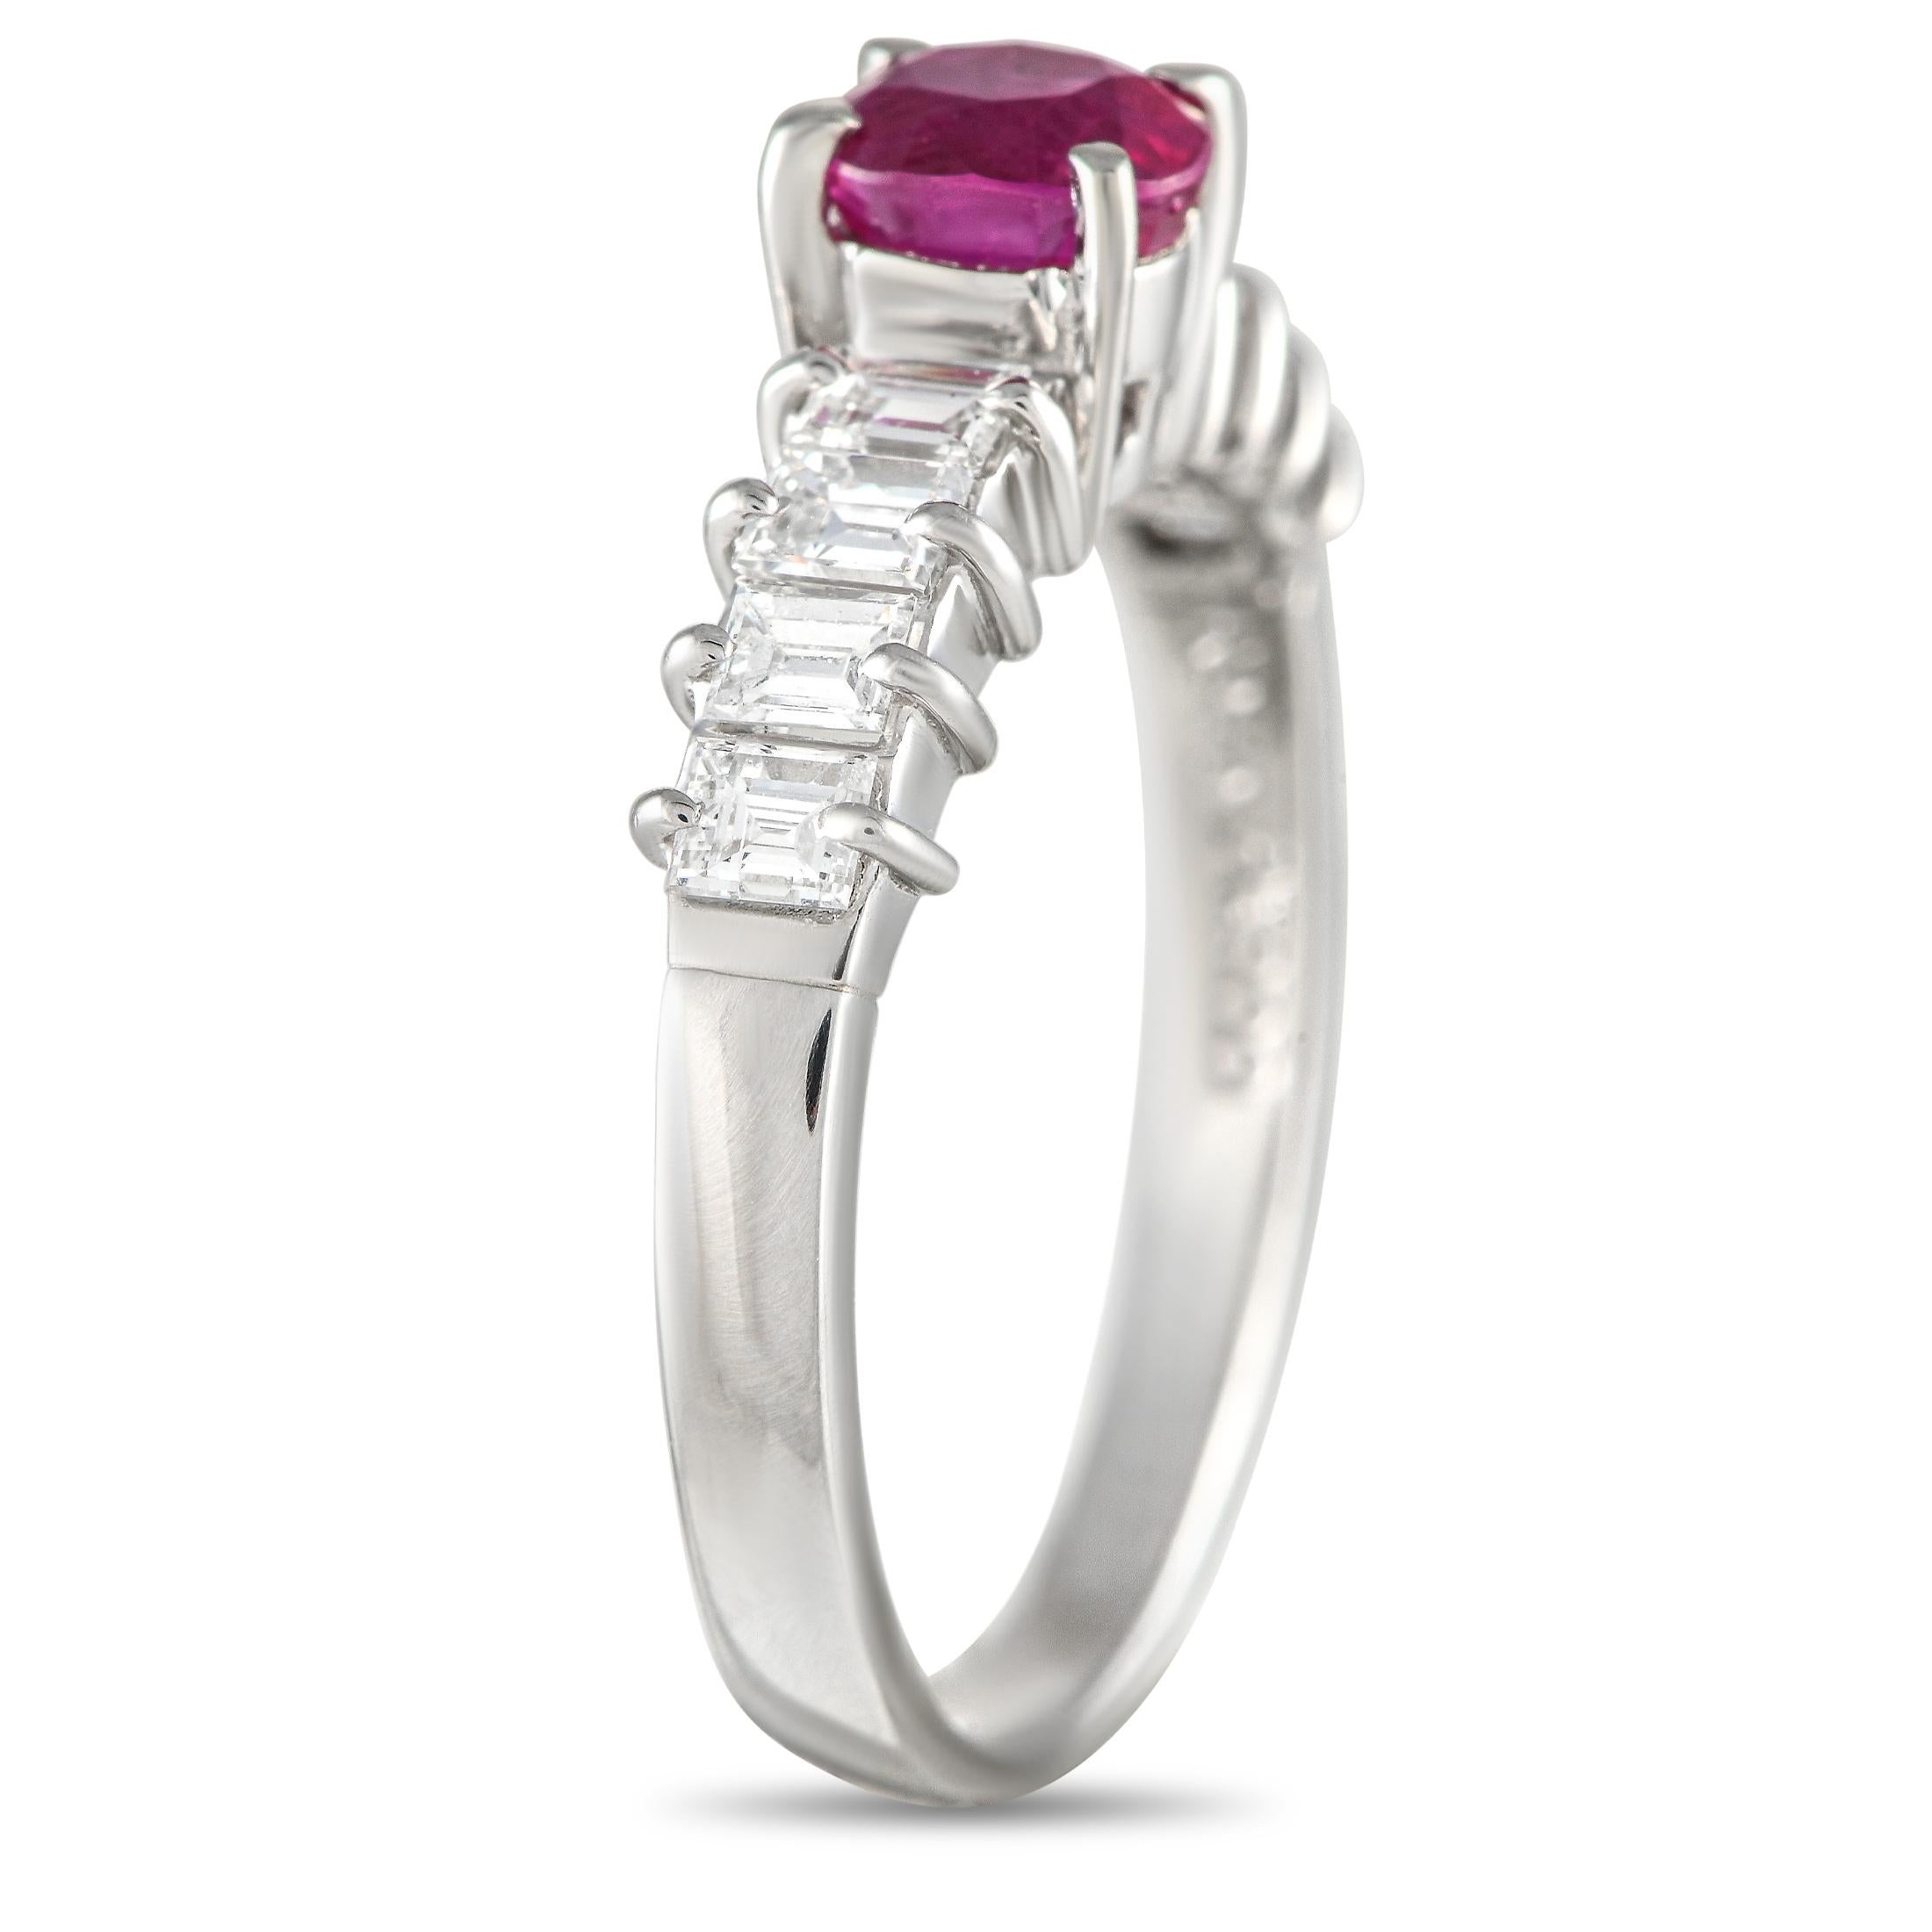 Perfect as a birthday gift or an anniversary band, this ruby and diamond ring can represent the brilliance and strength of love. The ring is made from the most durable precious metal. Running along its shoulders are step-cut diamonds on shared